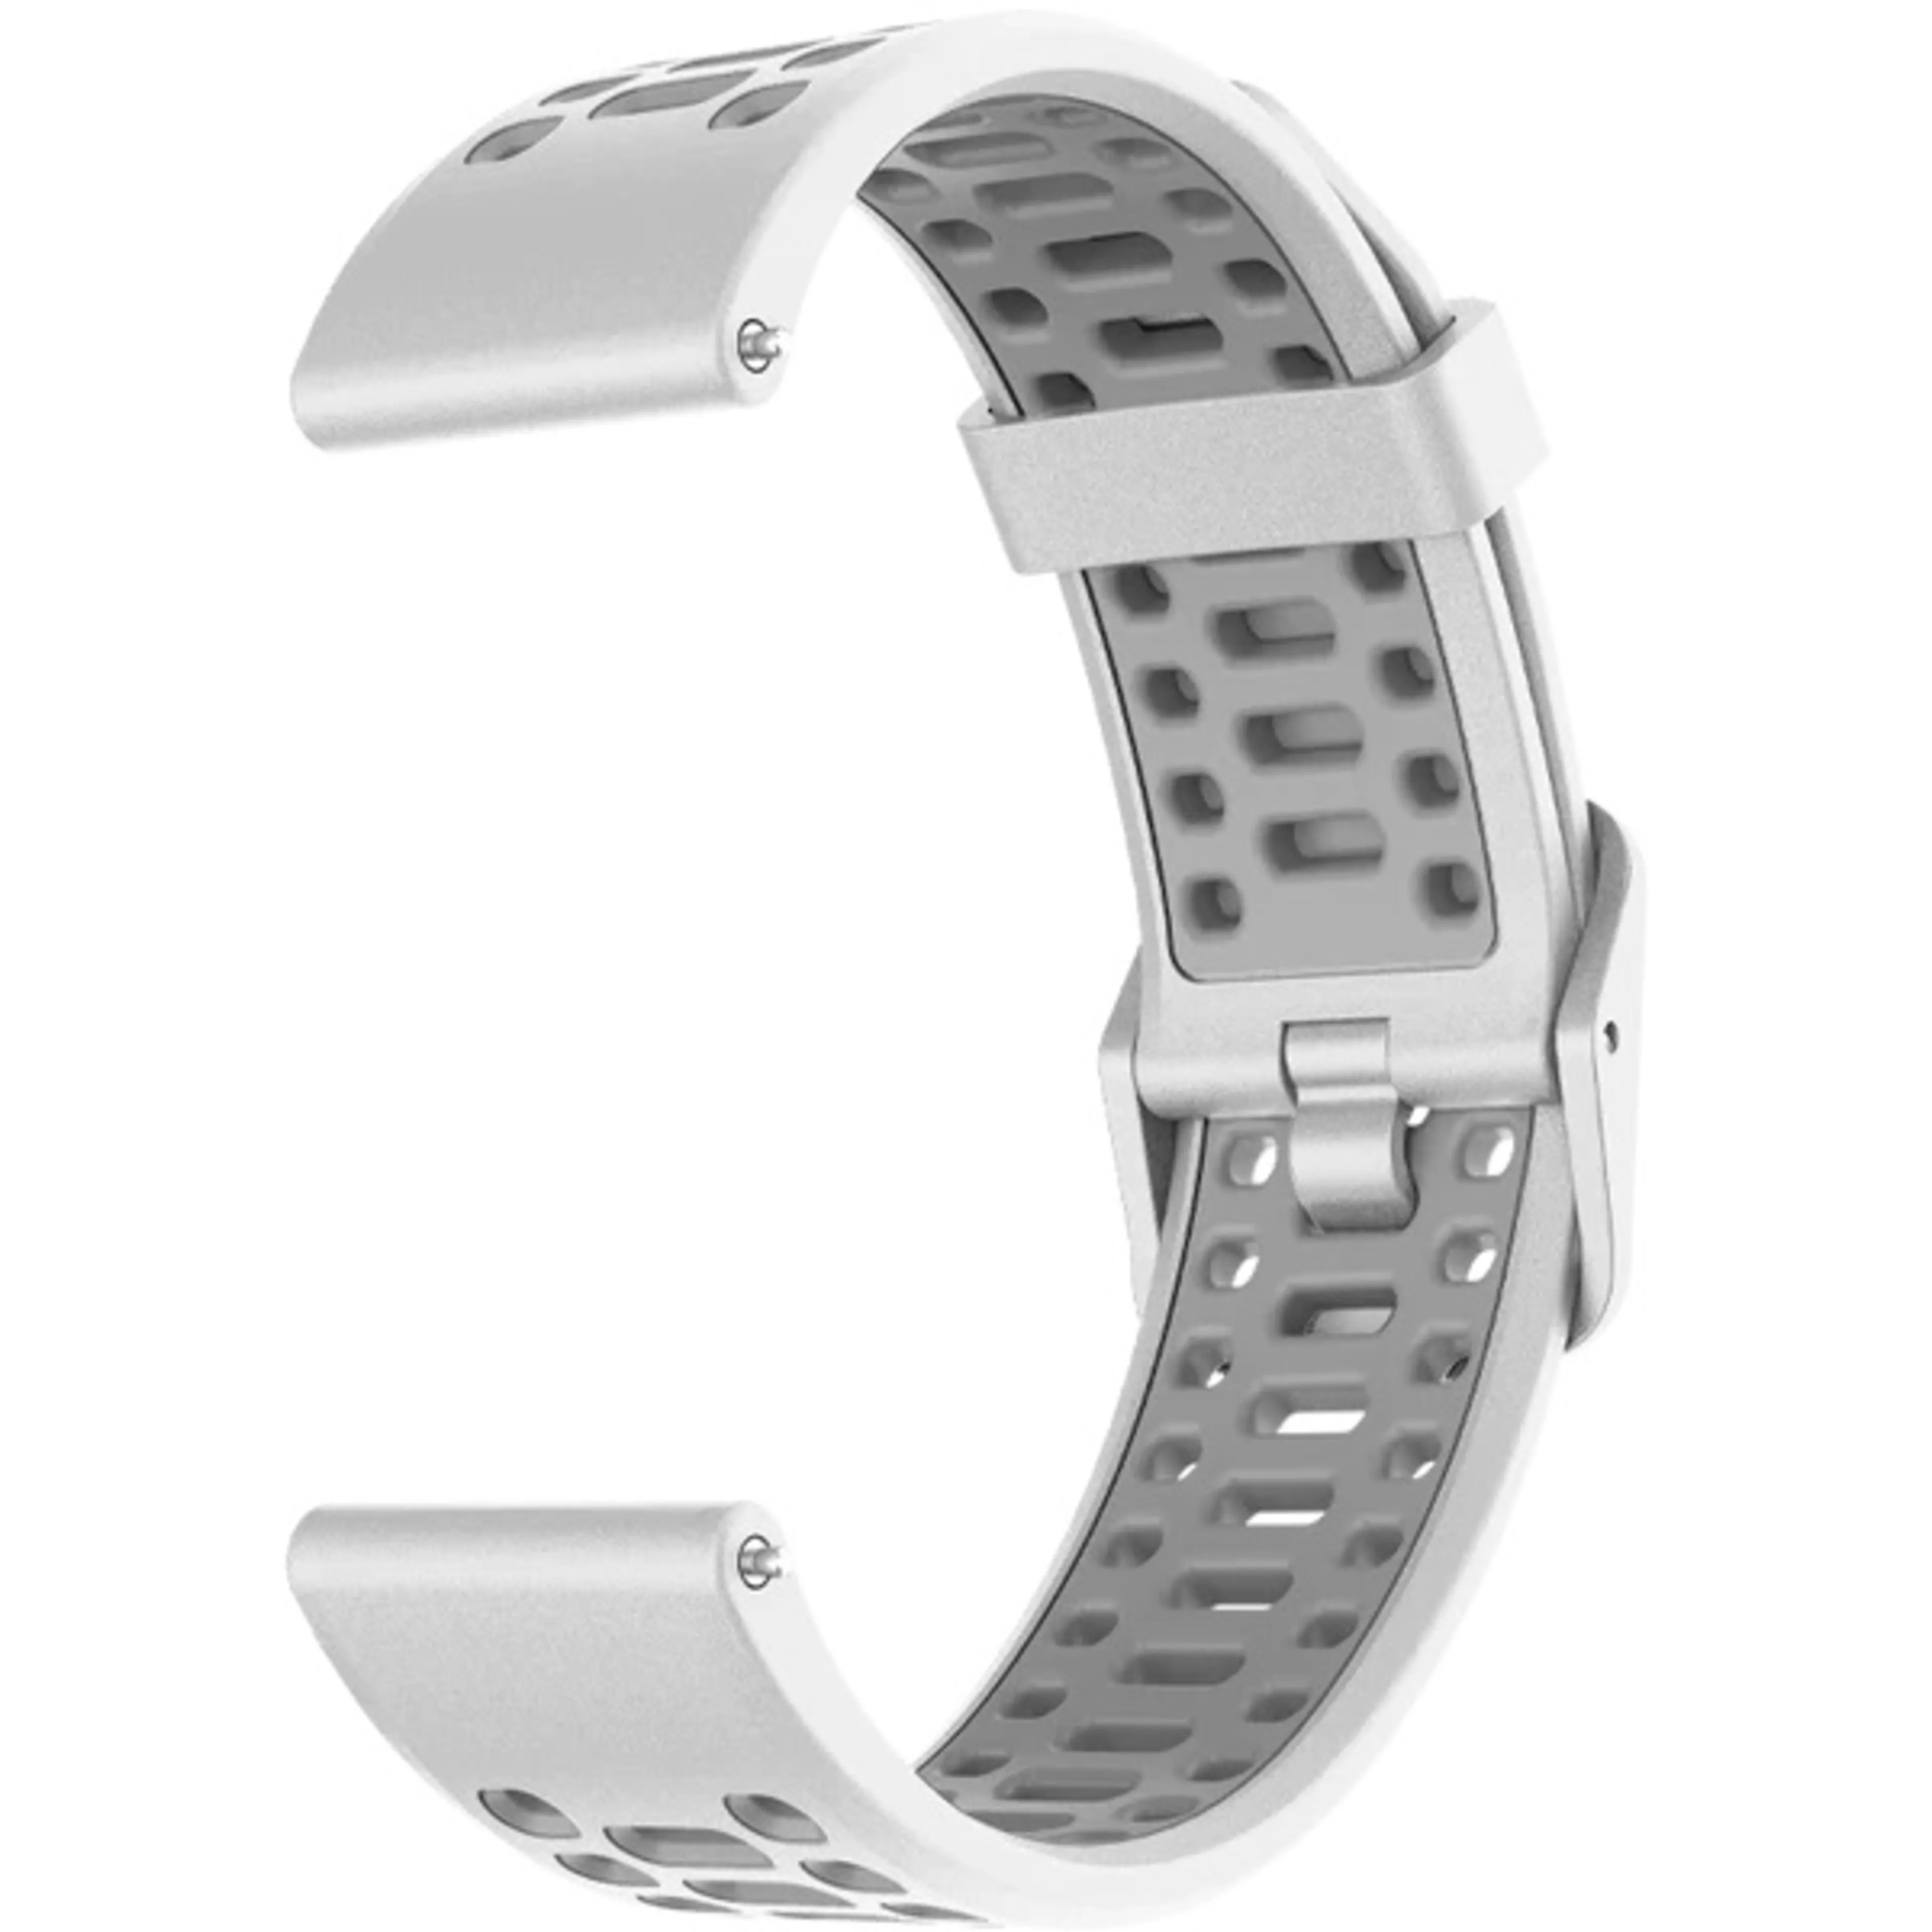 ACC Band Pace 2/Apex 42mm Silicone White